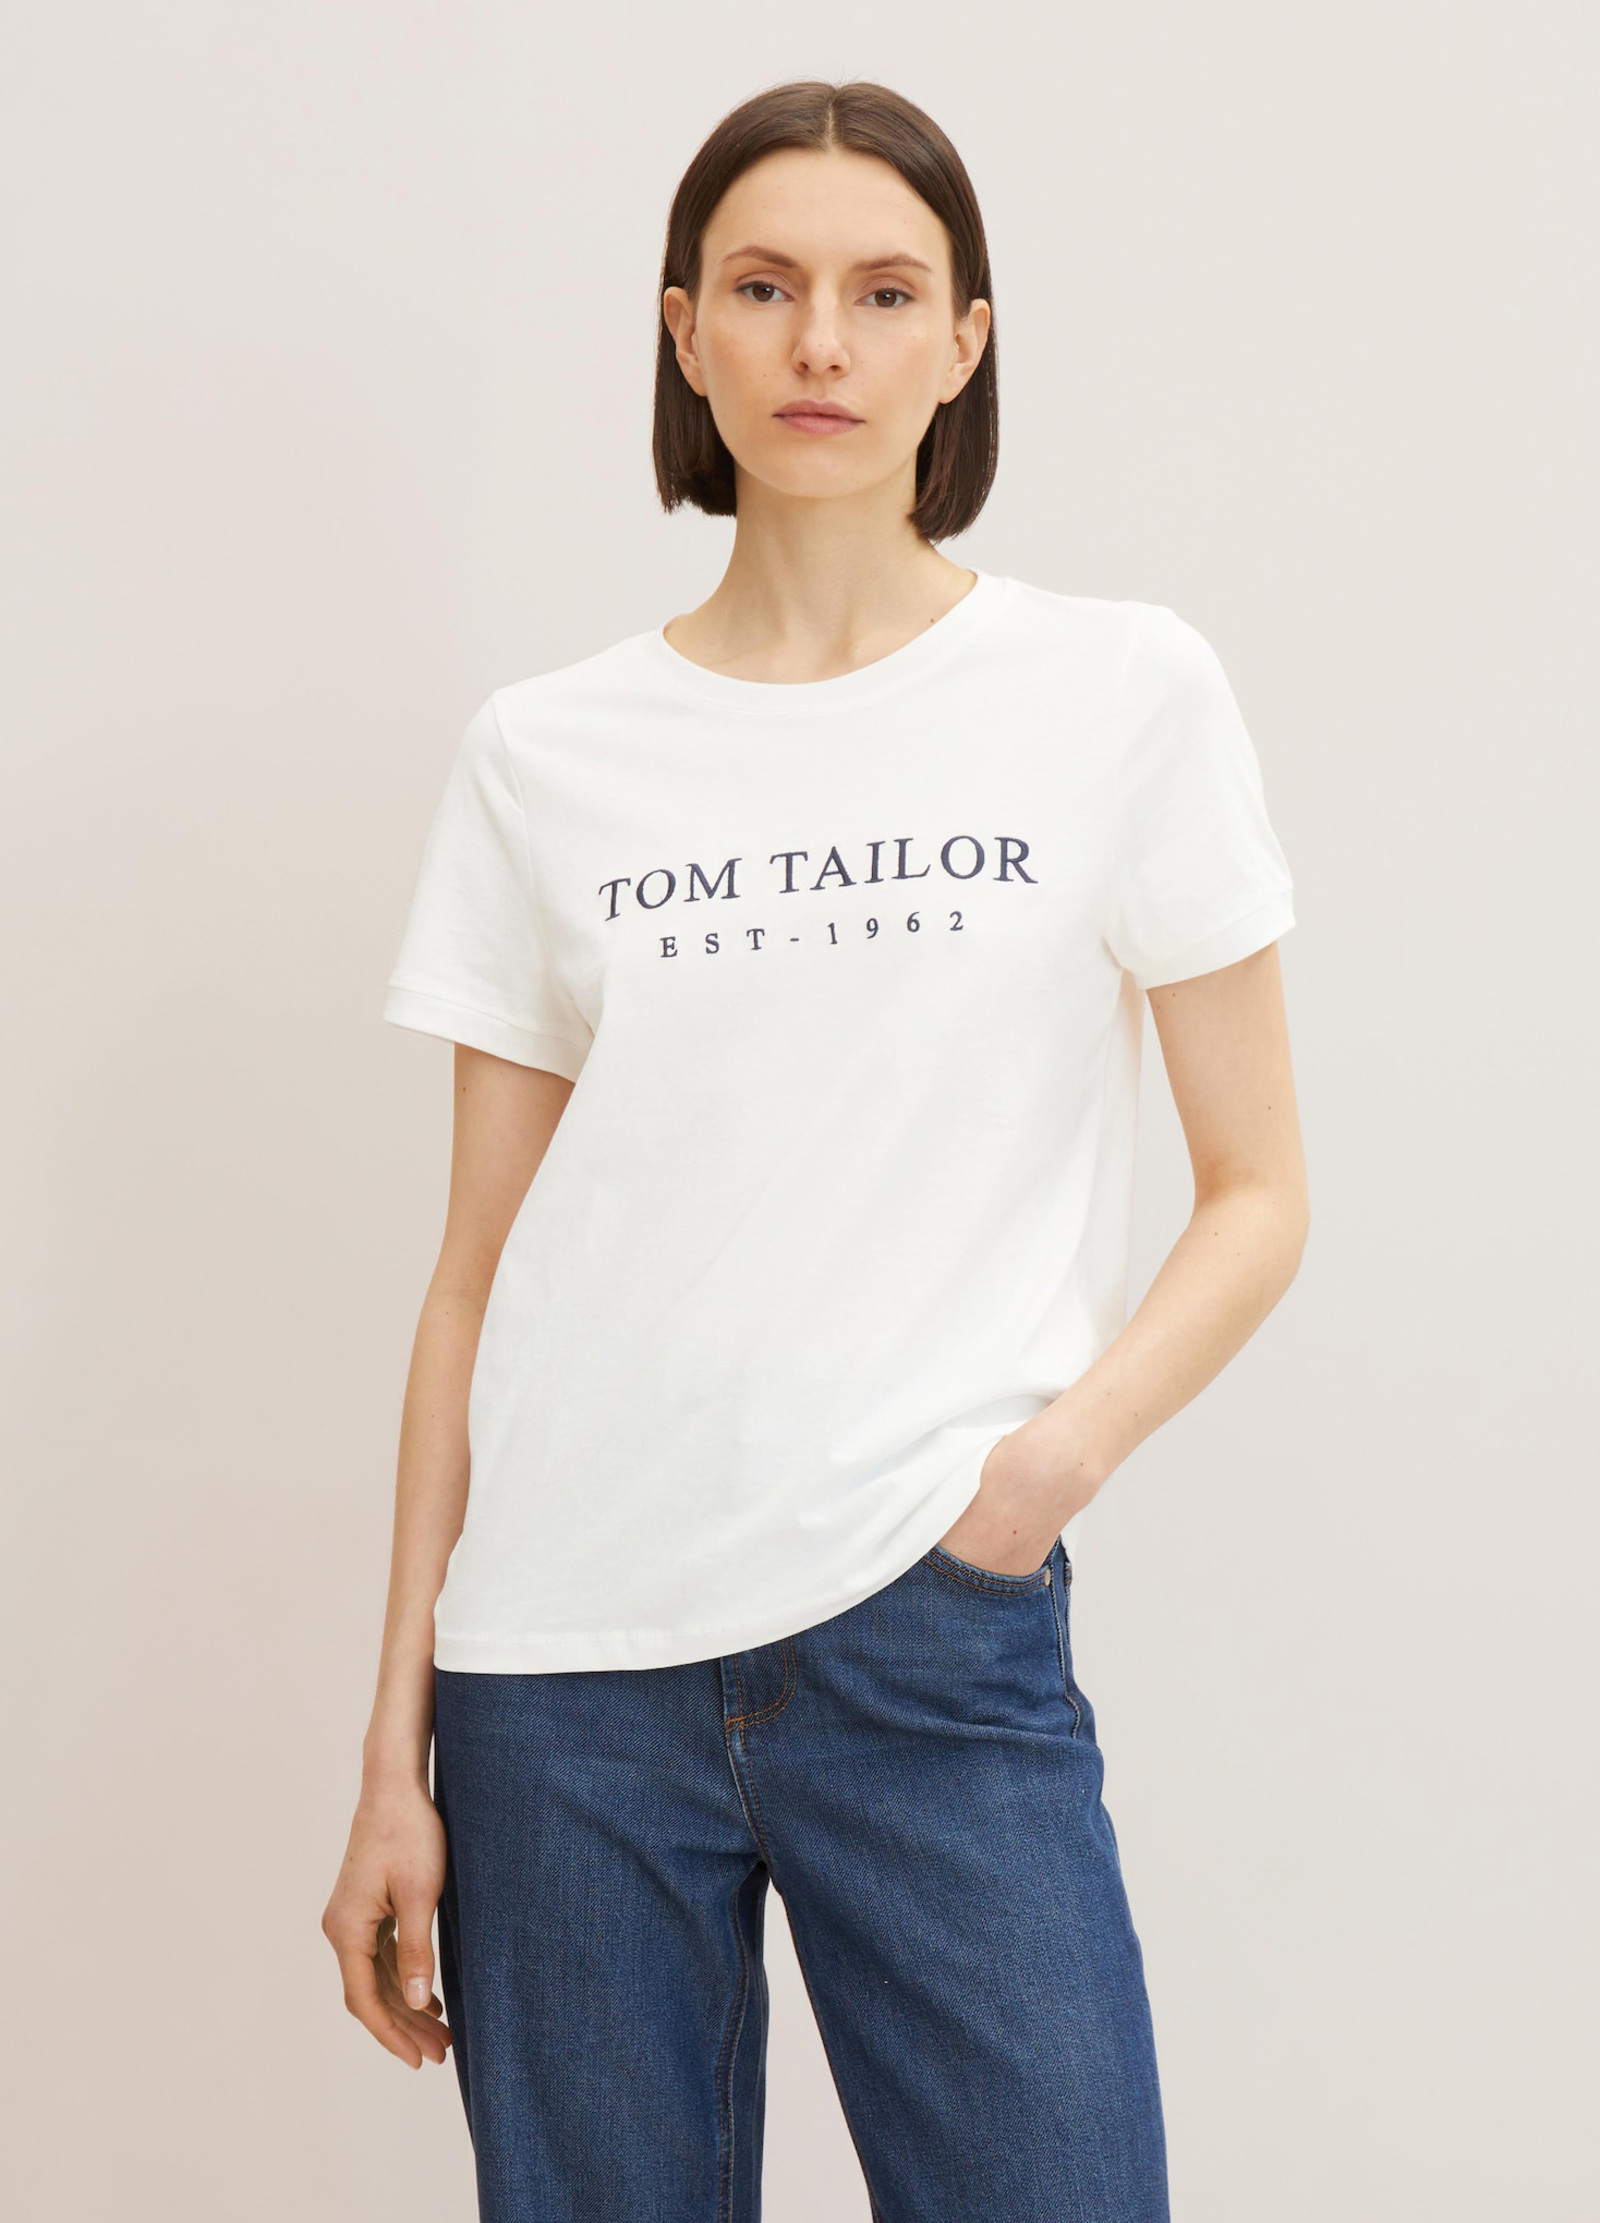 Tom Tailor® T-shirt With A Print - Whisper White Size L